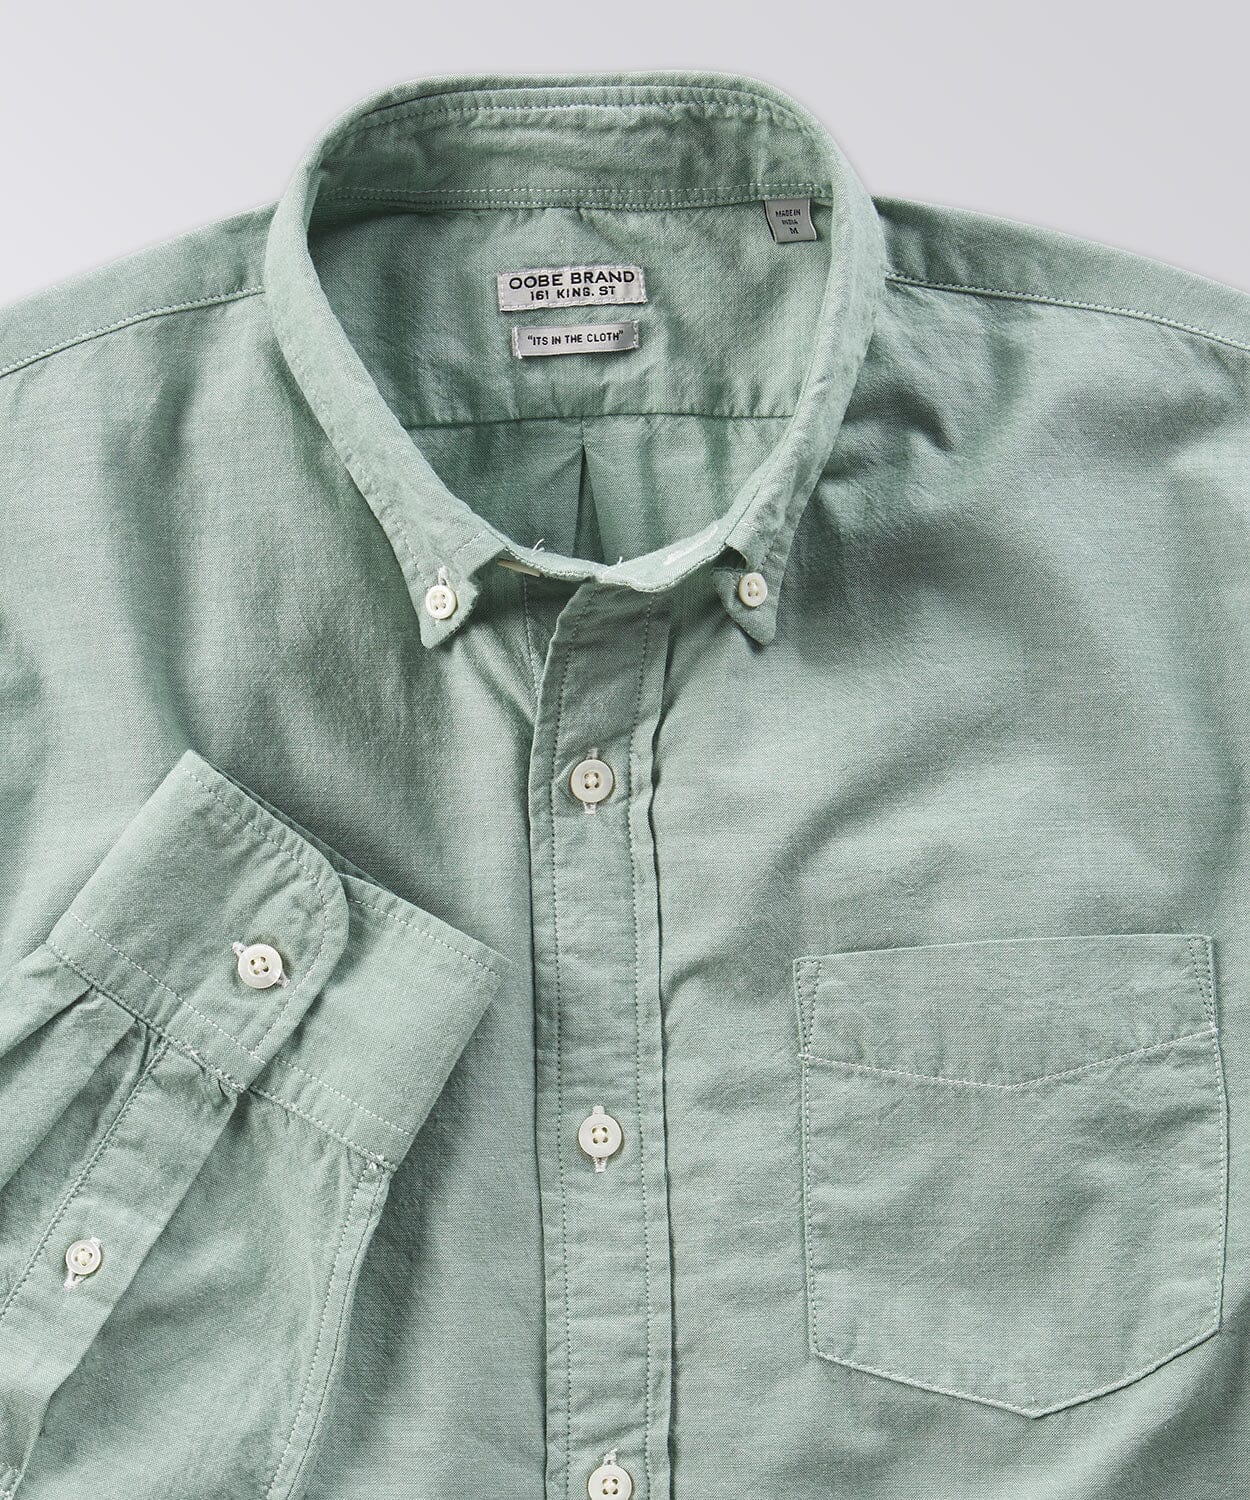 King Street Solid Oxford Shirt Button Downs OOBE BRAND 